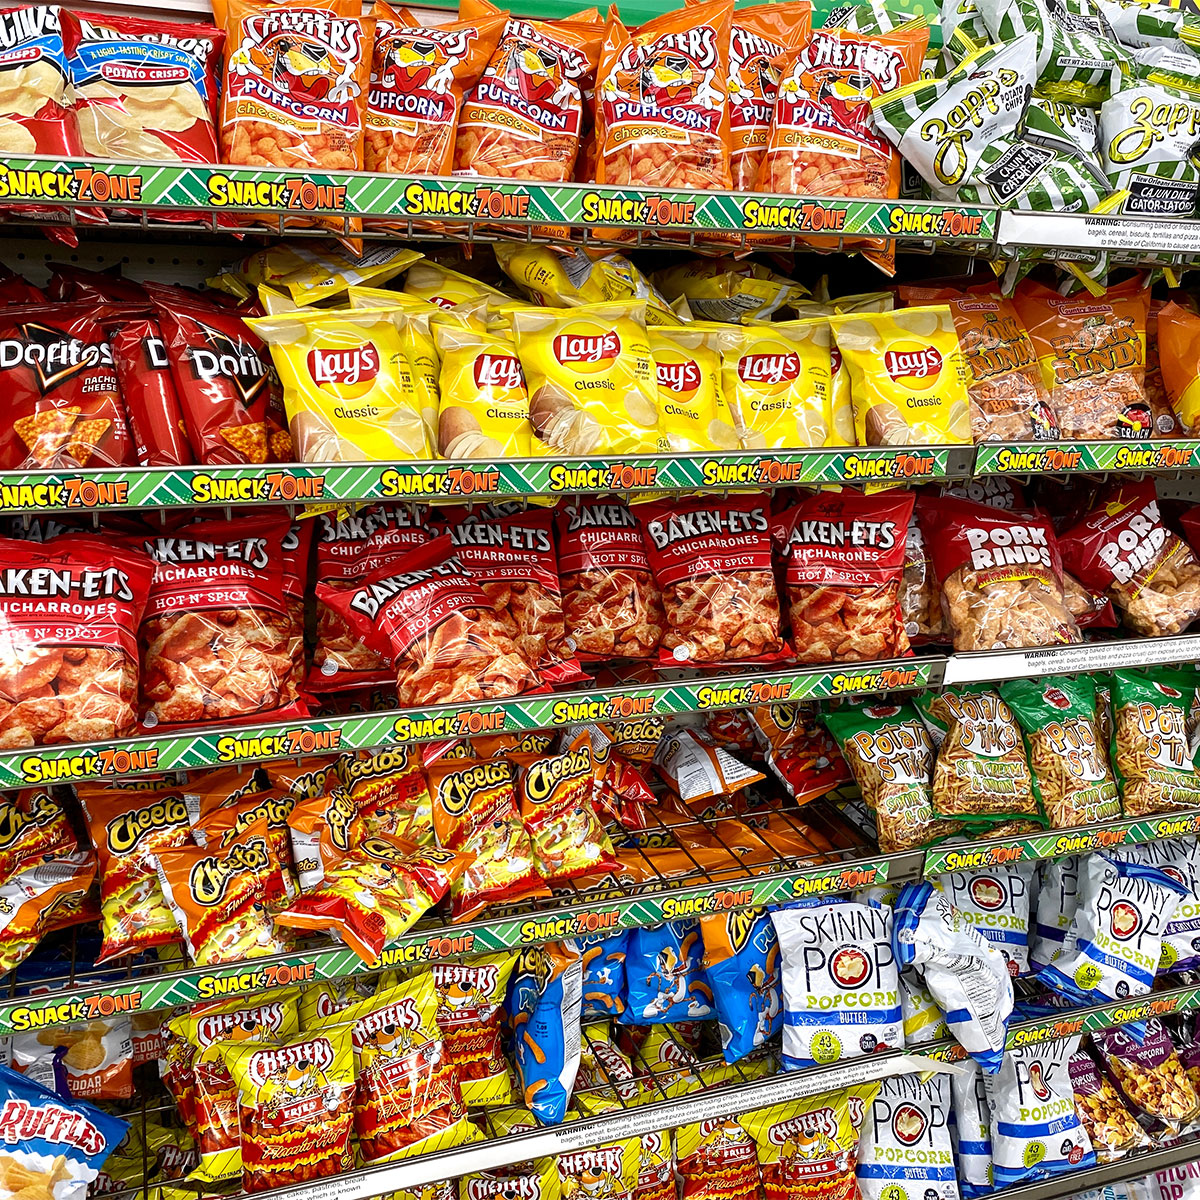 potato chips at the store shelves pork rinds bags lined up